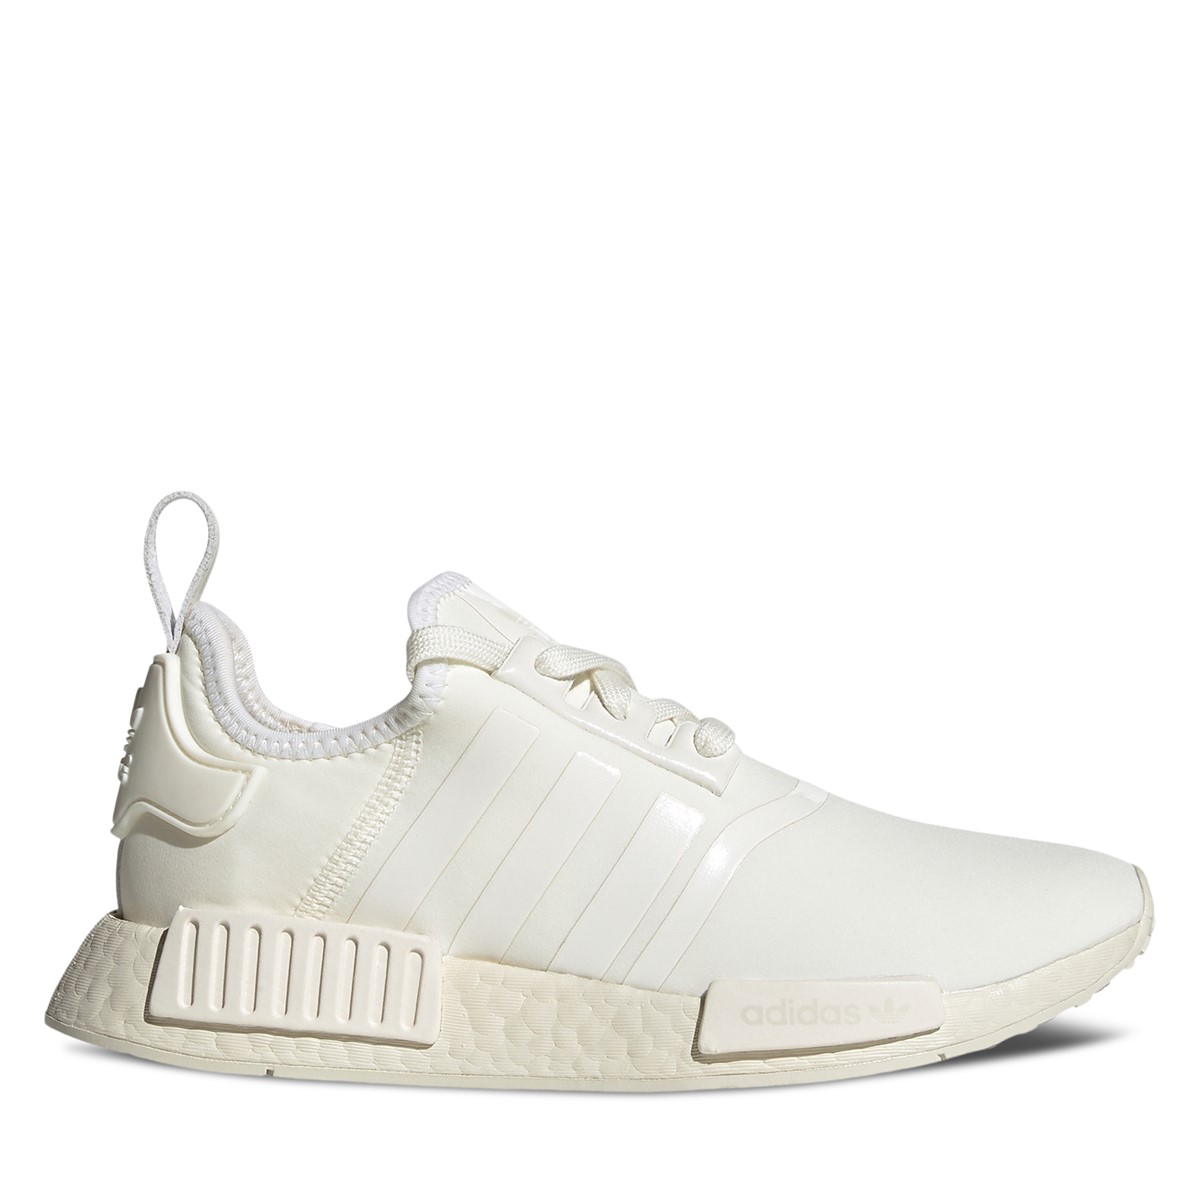 nmd_r1 white shoes